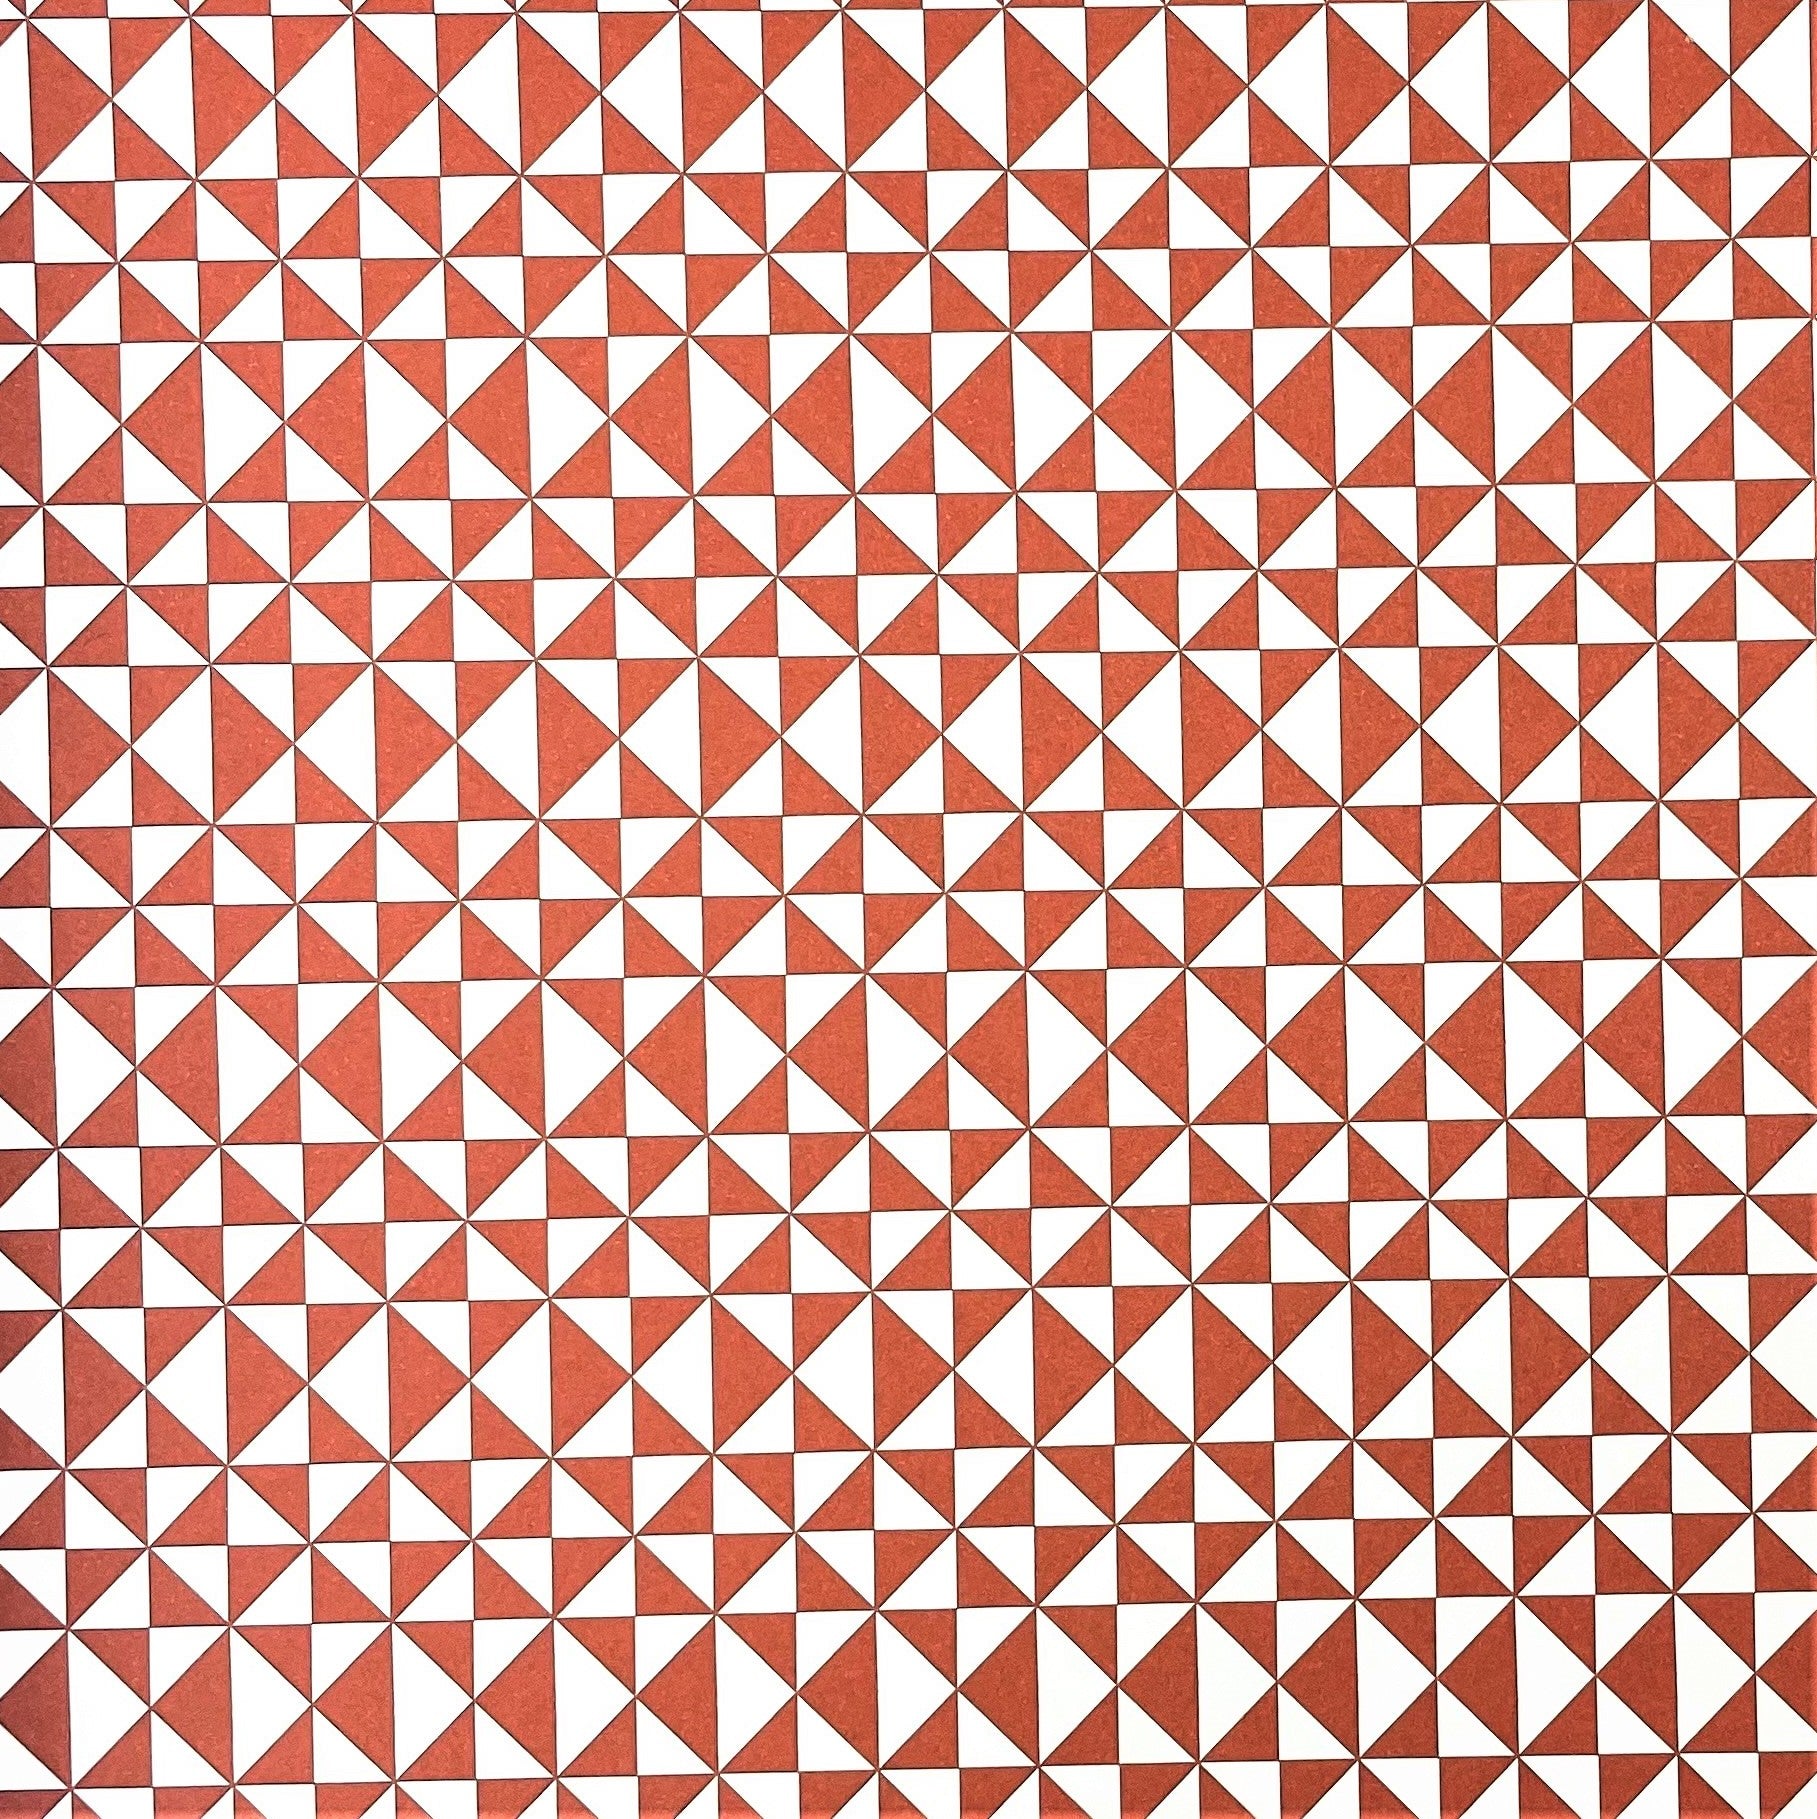 wrapping paper with an abstract triangle pattern in brick red and white by Ola Studio